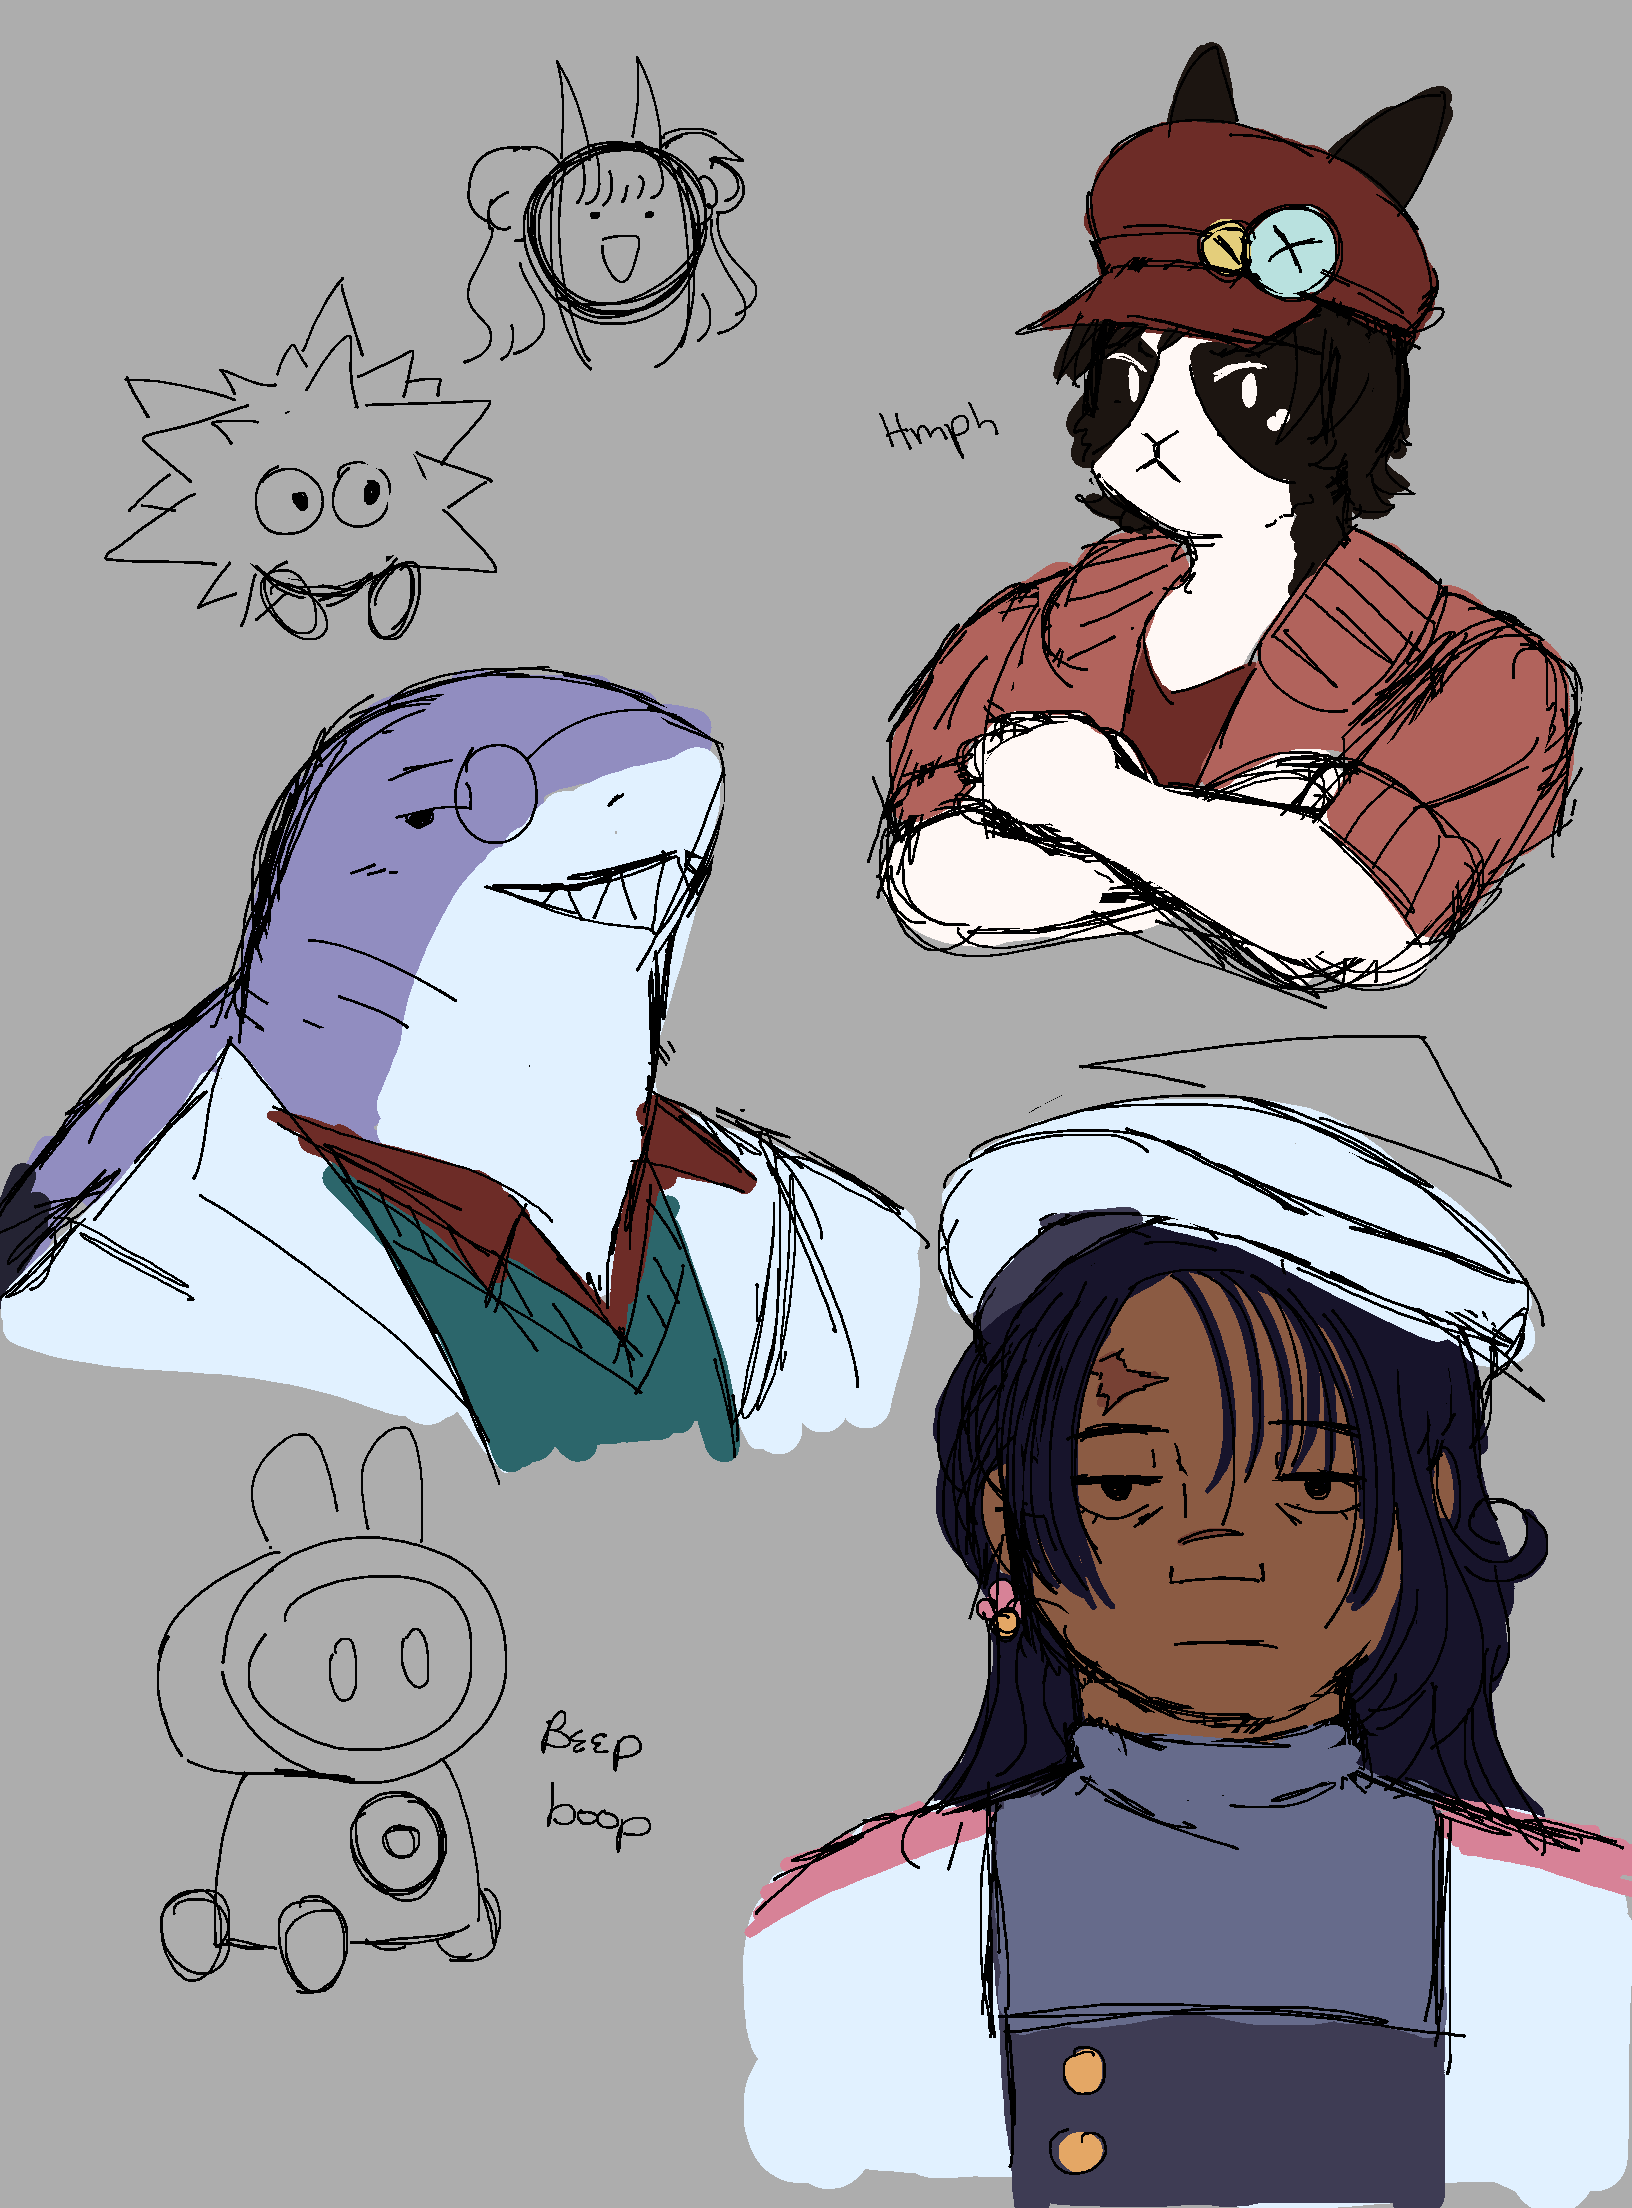 Bust doodles of Bonnie, Mash, and Nemesia with flat colors. Accompanied by lined doodles of Candi, Koman, and Pixel